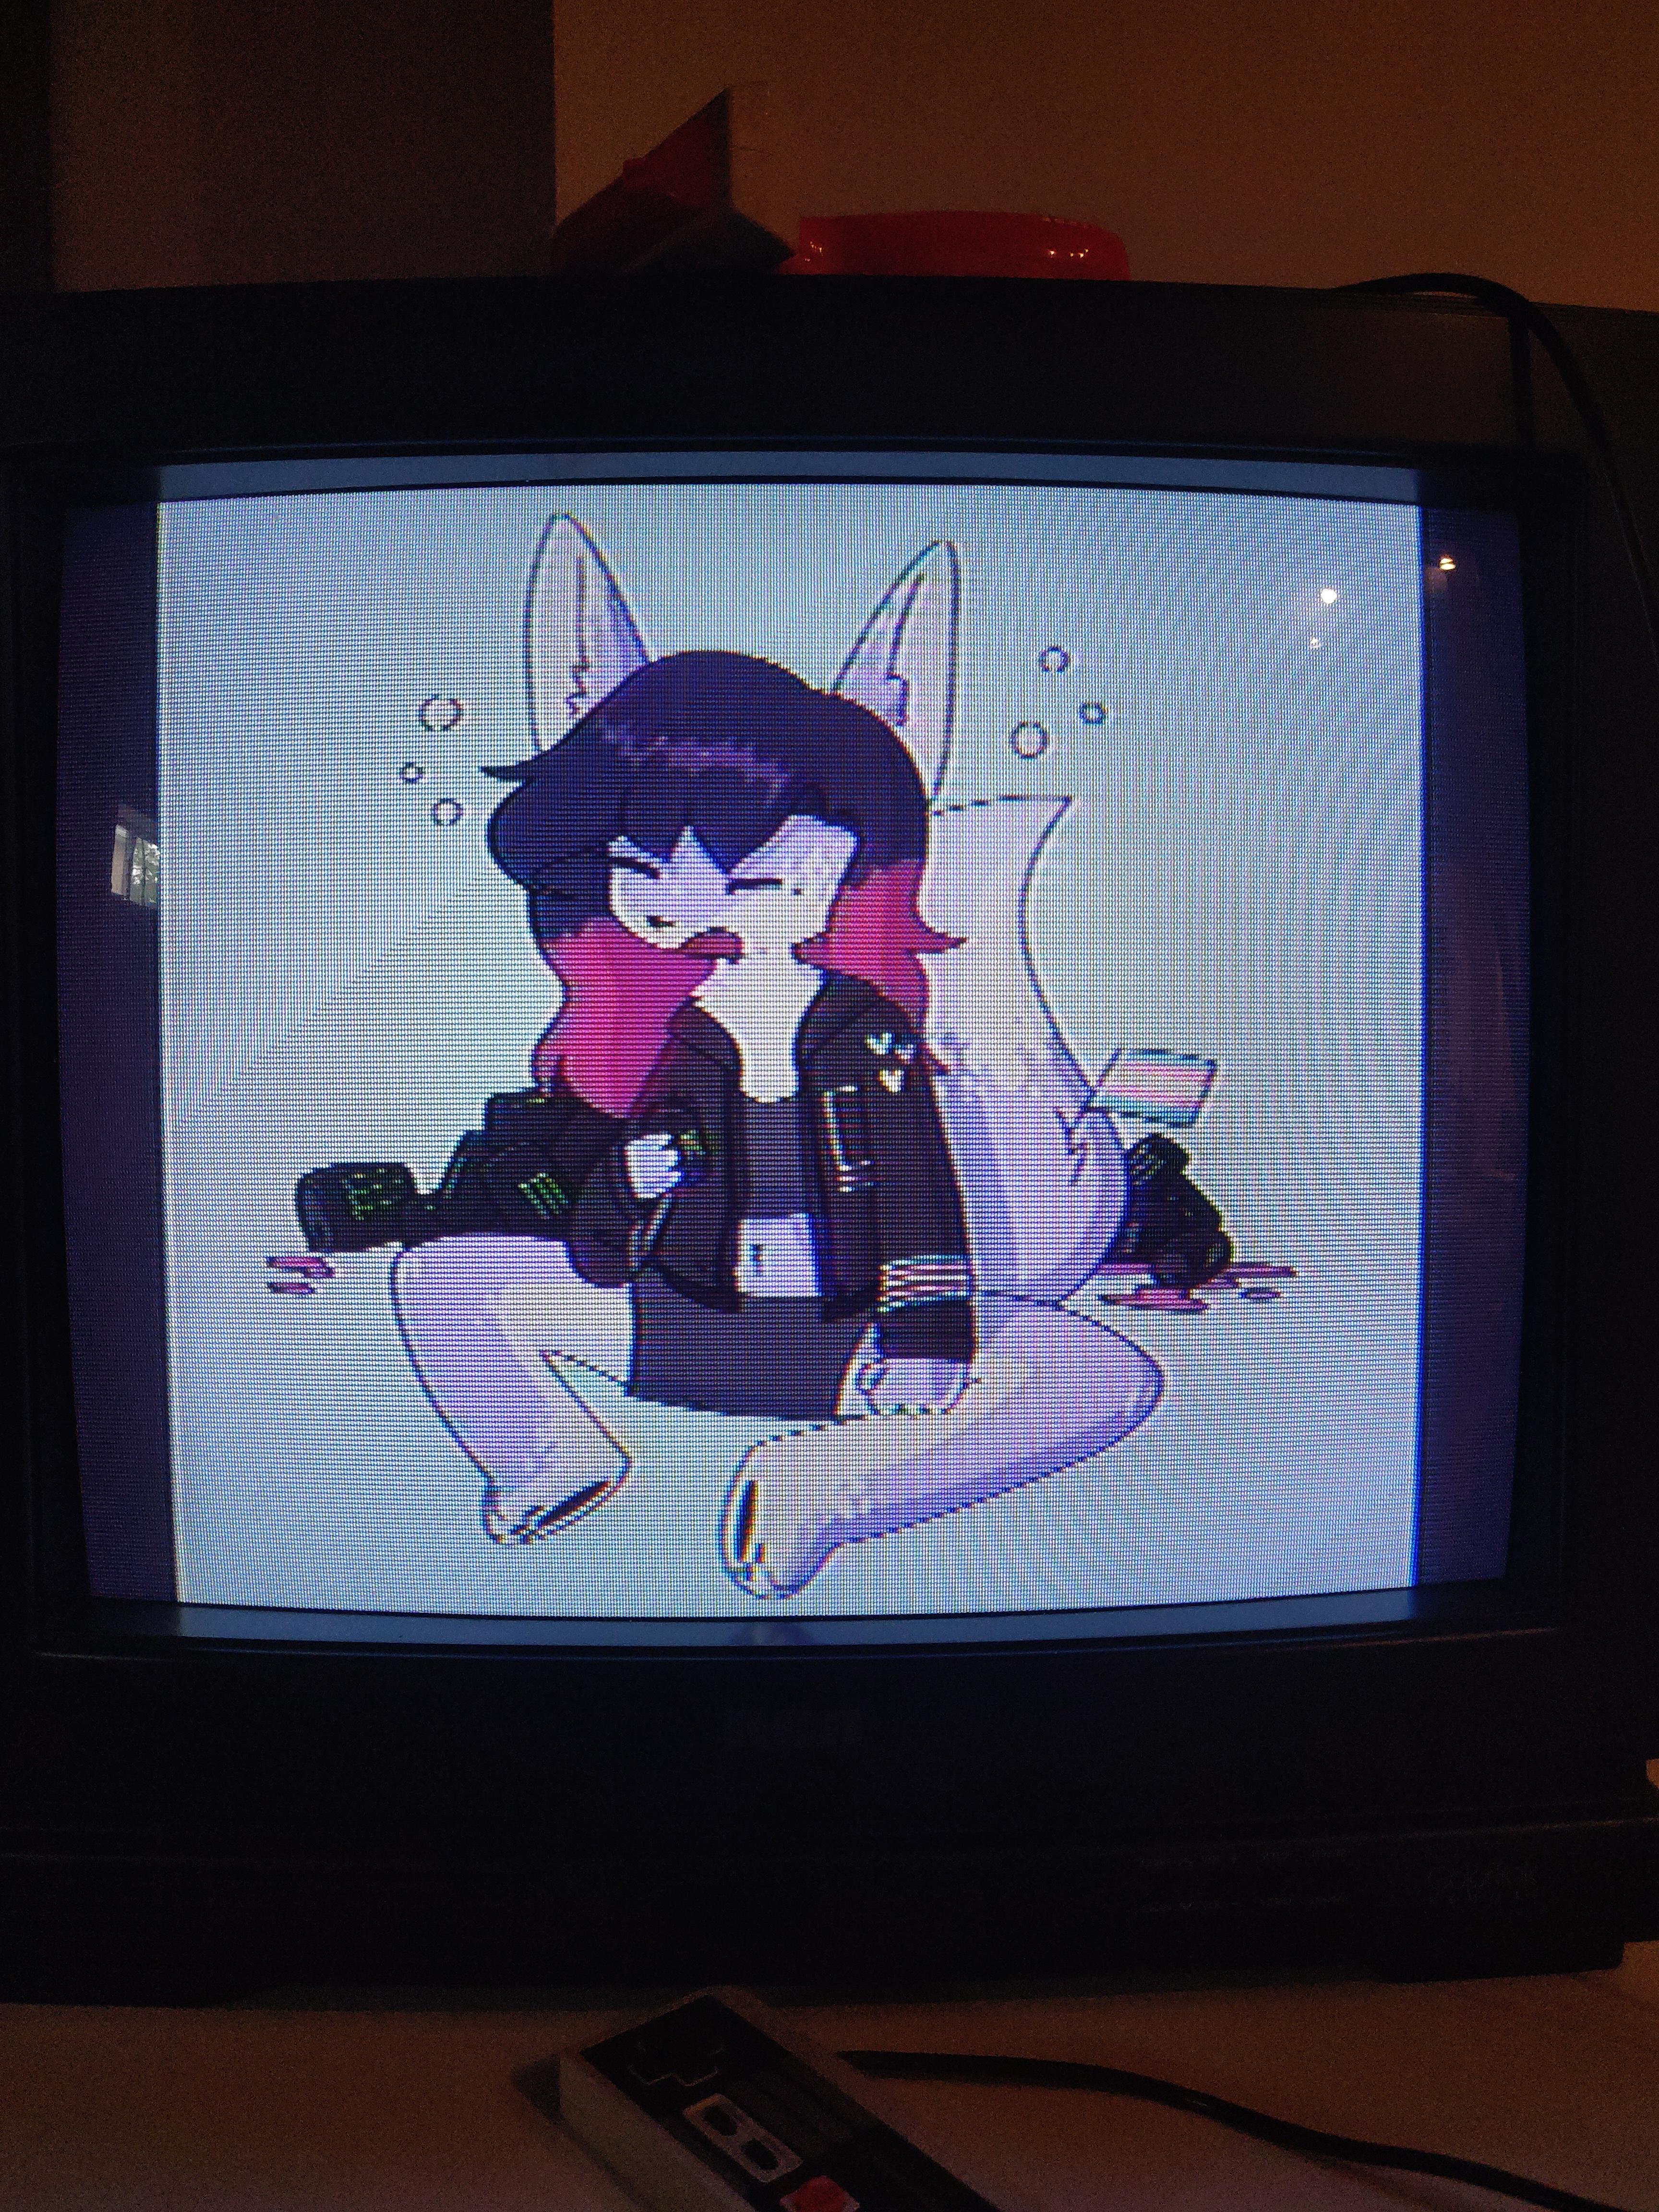 the first commission of my fursona, on a CRT TV